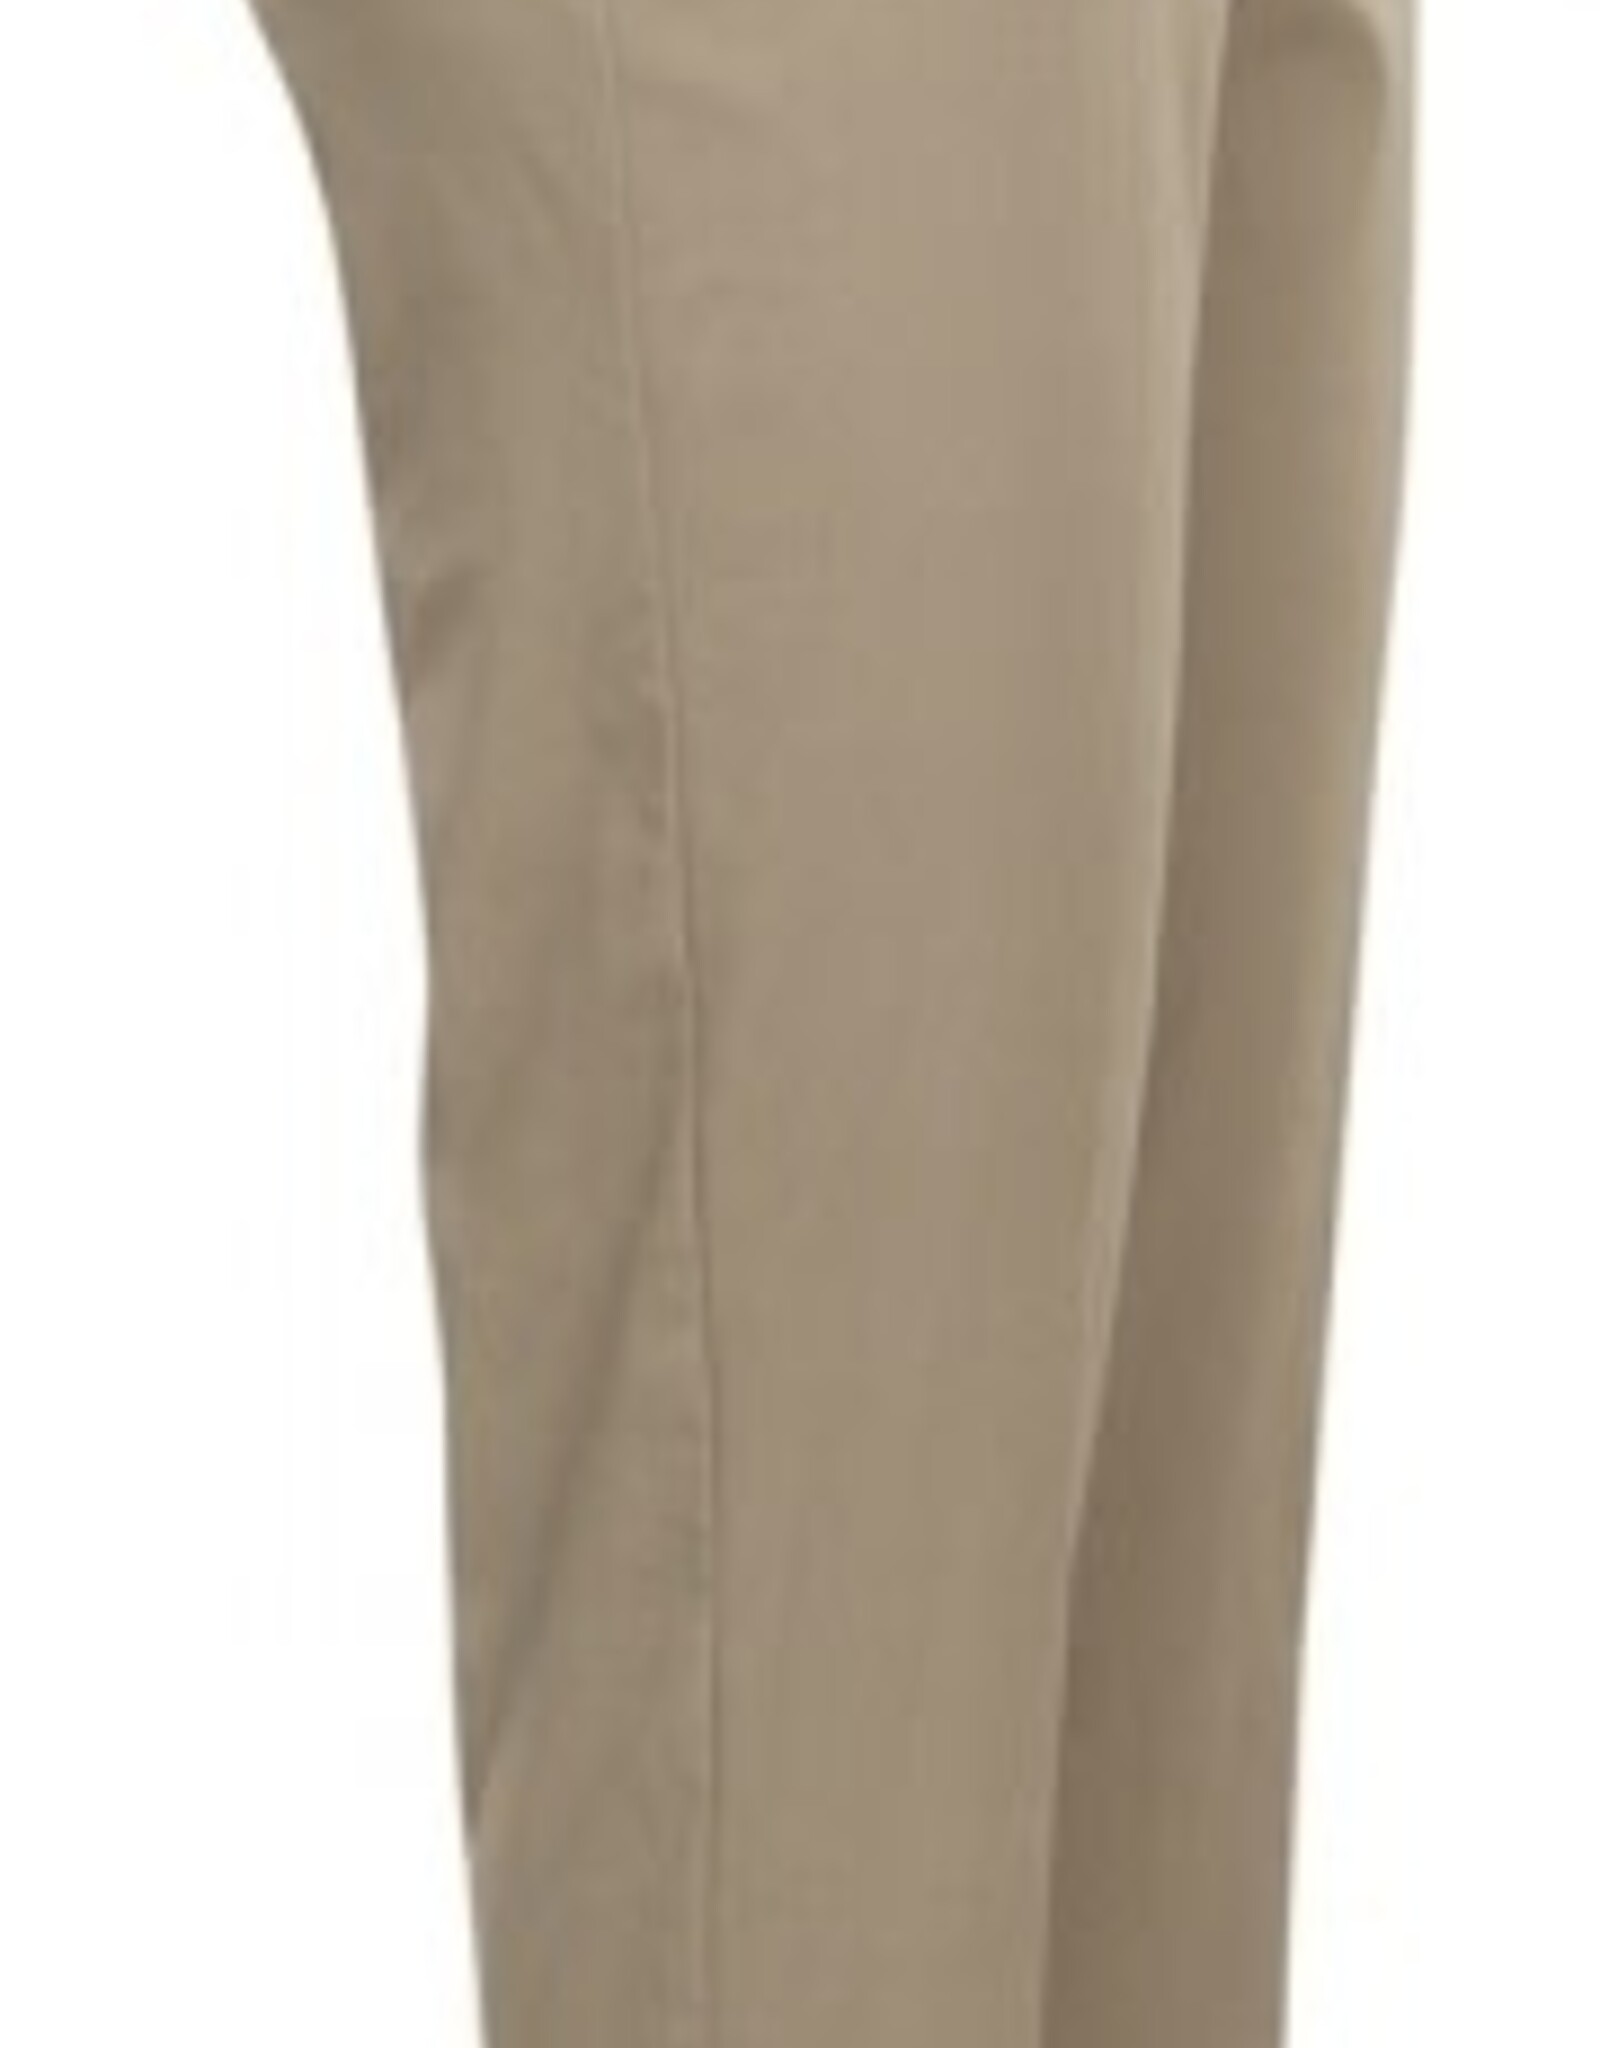 Pebble Pull-On Straight Leg Pant W/Front Pockets